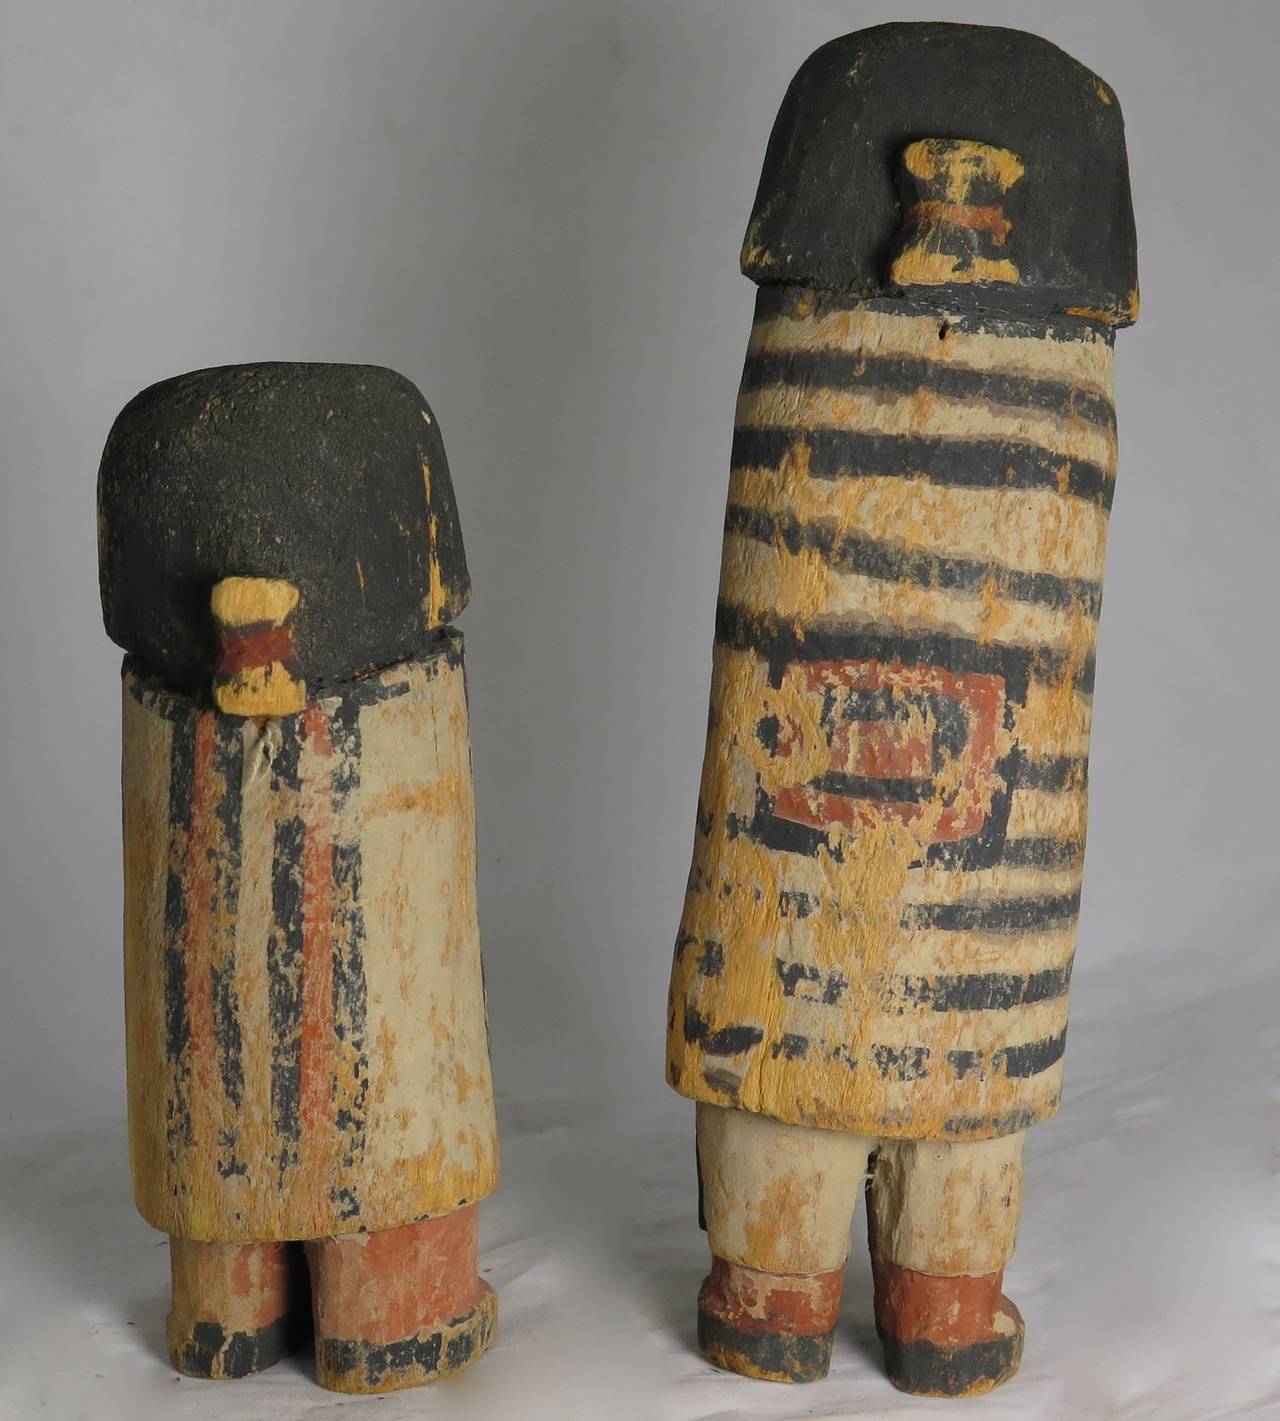 These two figures represent Hopi personages or chiefs. One wears a second phase chiefs blanket, the other a hopi style blanket. They date from circa 1890-1910. They were purchased from a Los Angeles dealer Ralph Altman in the 1950s. These secular